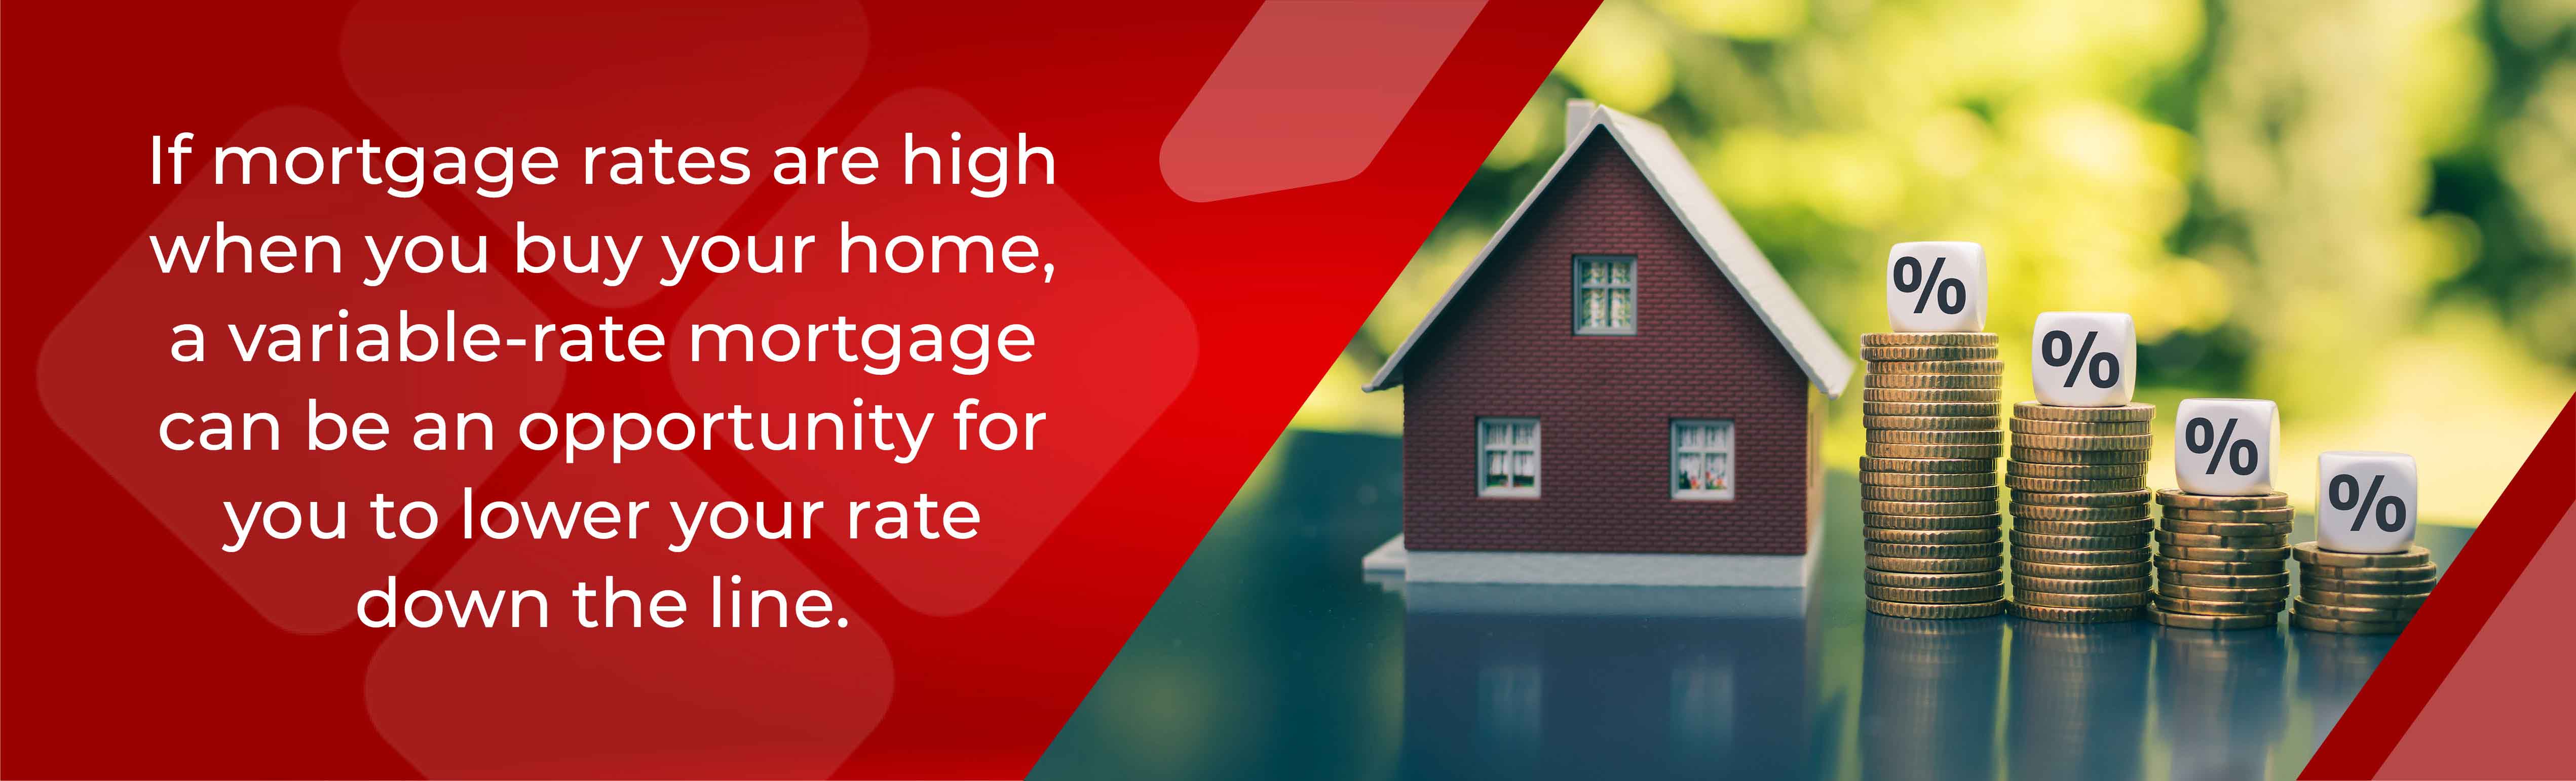 If mortgage rats are high when you buy your home, a variable rate mortgage can be an opportunity for you to lower your rate down the line. 